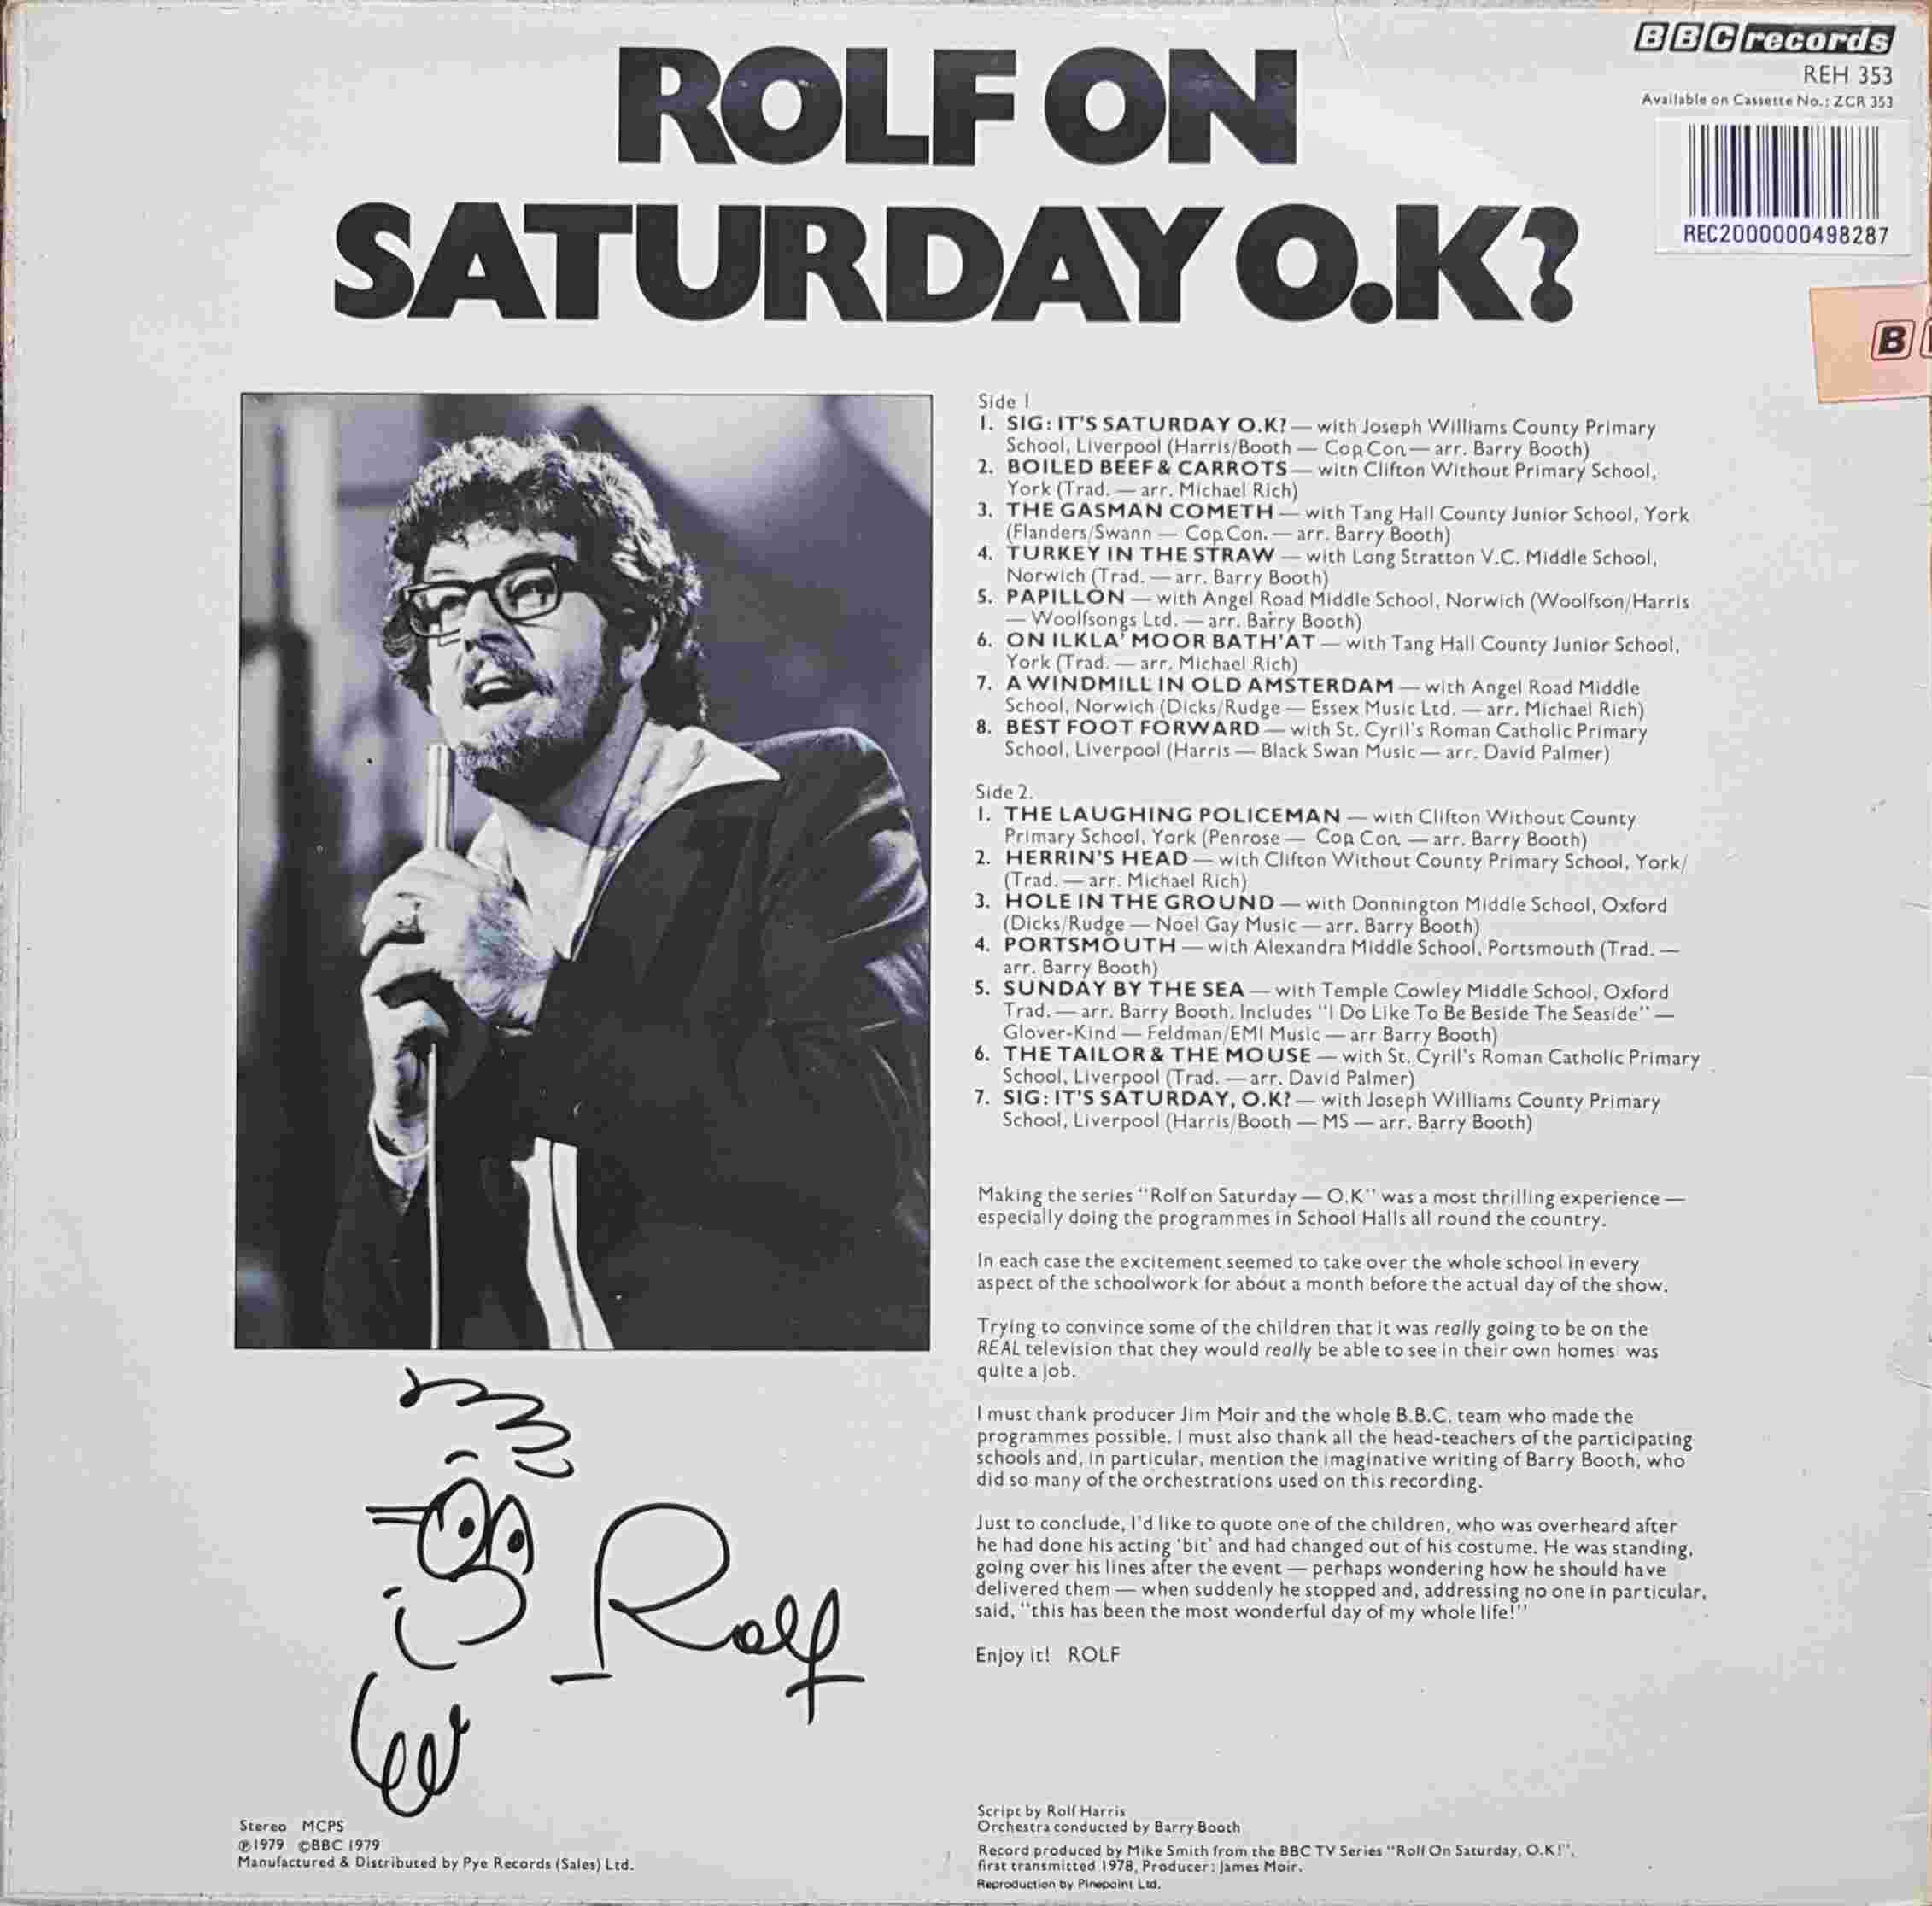 Picture of REH 353 Rolf on Saturday OK by artist Rolf Harris from the BBC records and Tapes library